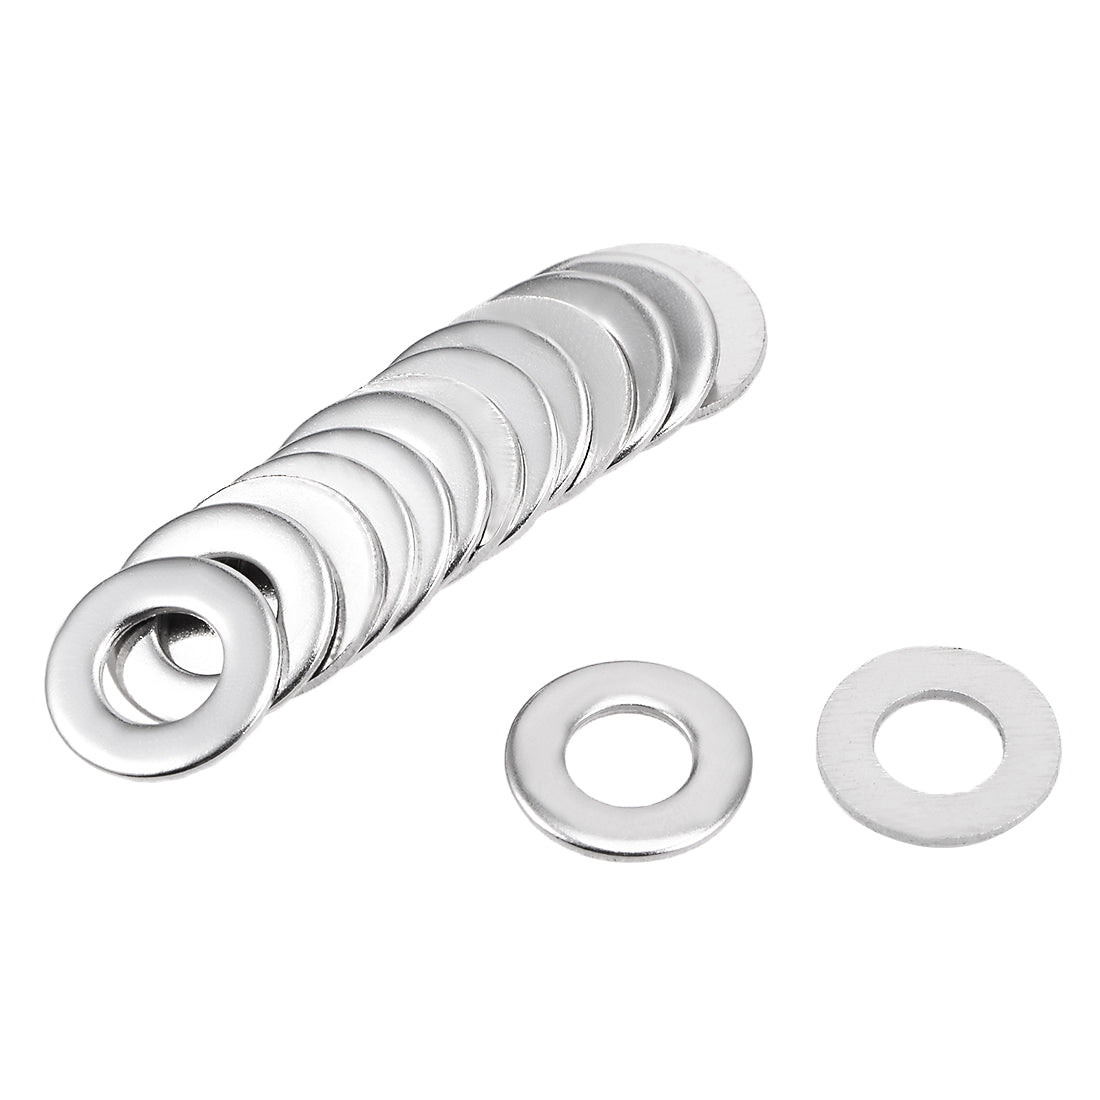 uxcell Uxcell 100 Pcs 8mm x 3mm x 0.9mm 304 Stainless Steel Flat Washer for Screw Bolt